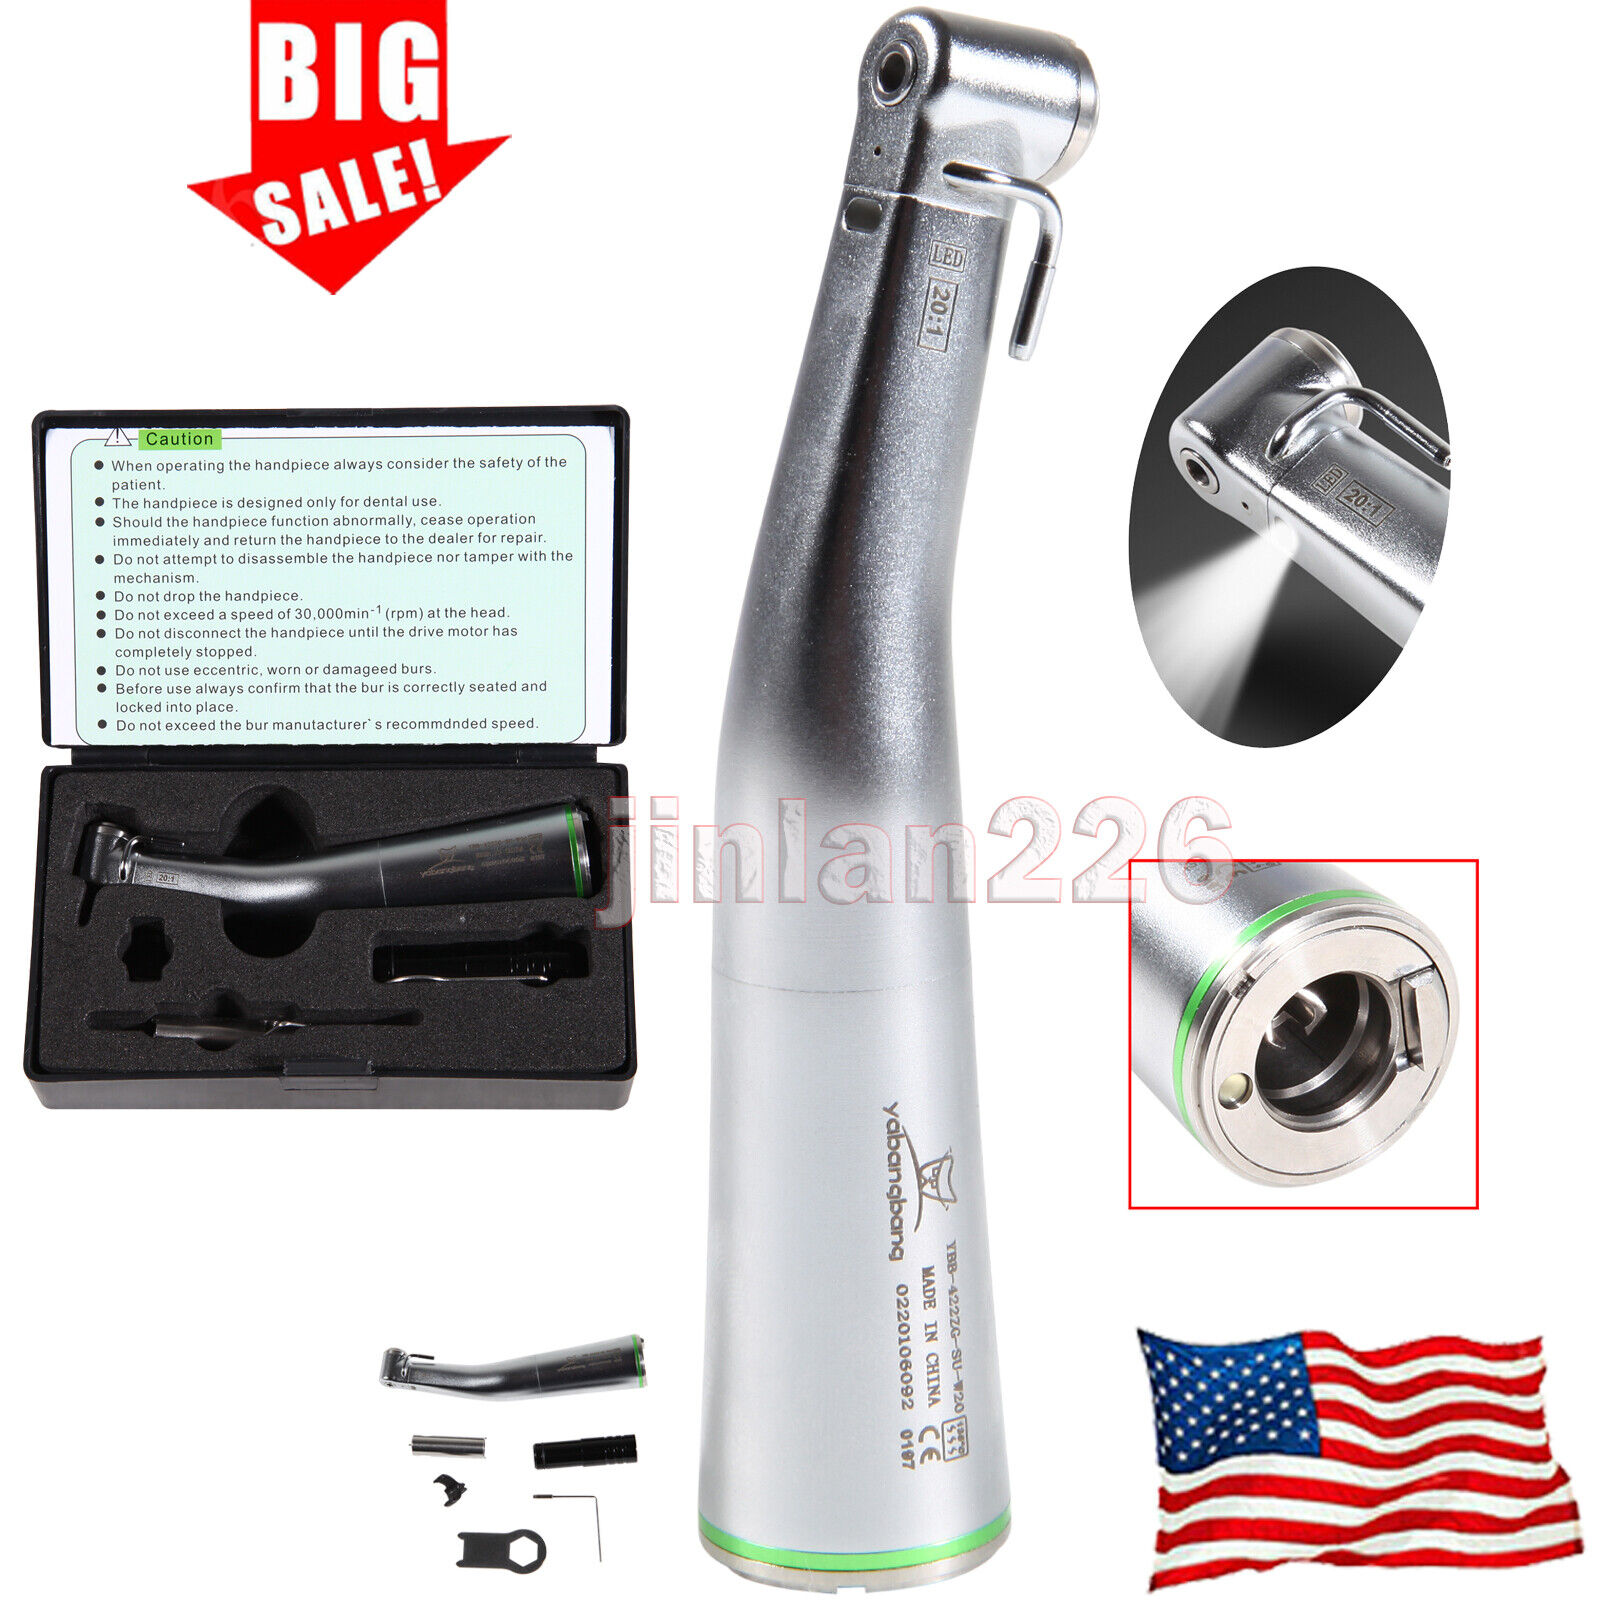 Dental 20:1 Implant LED E-generator Contra Angle Handpiece Low Speed NSK Style